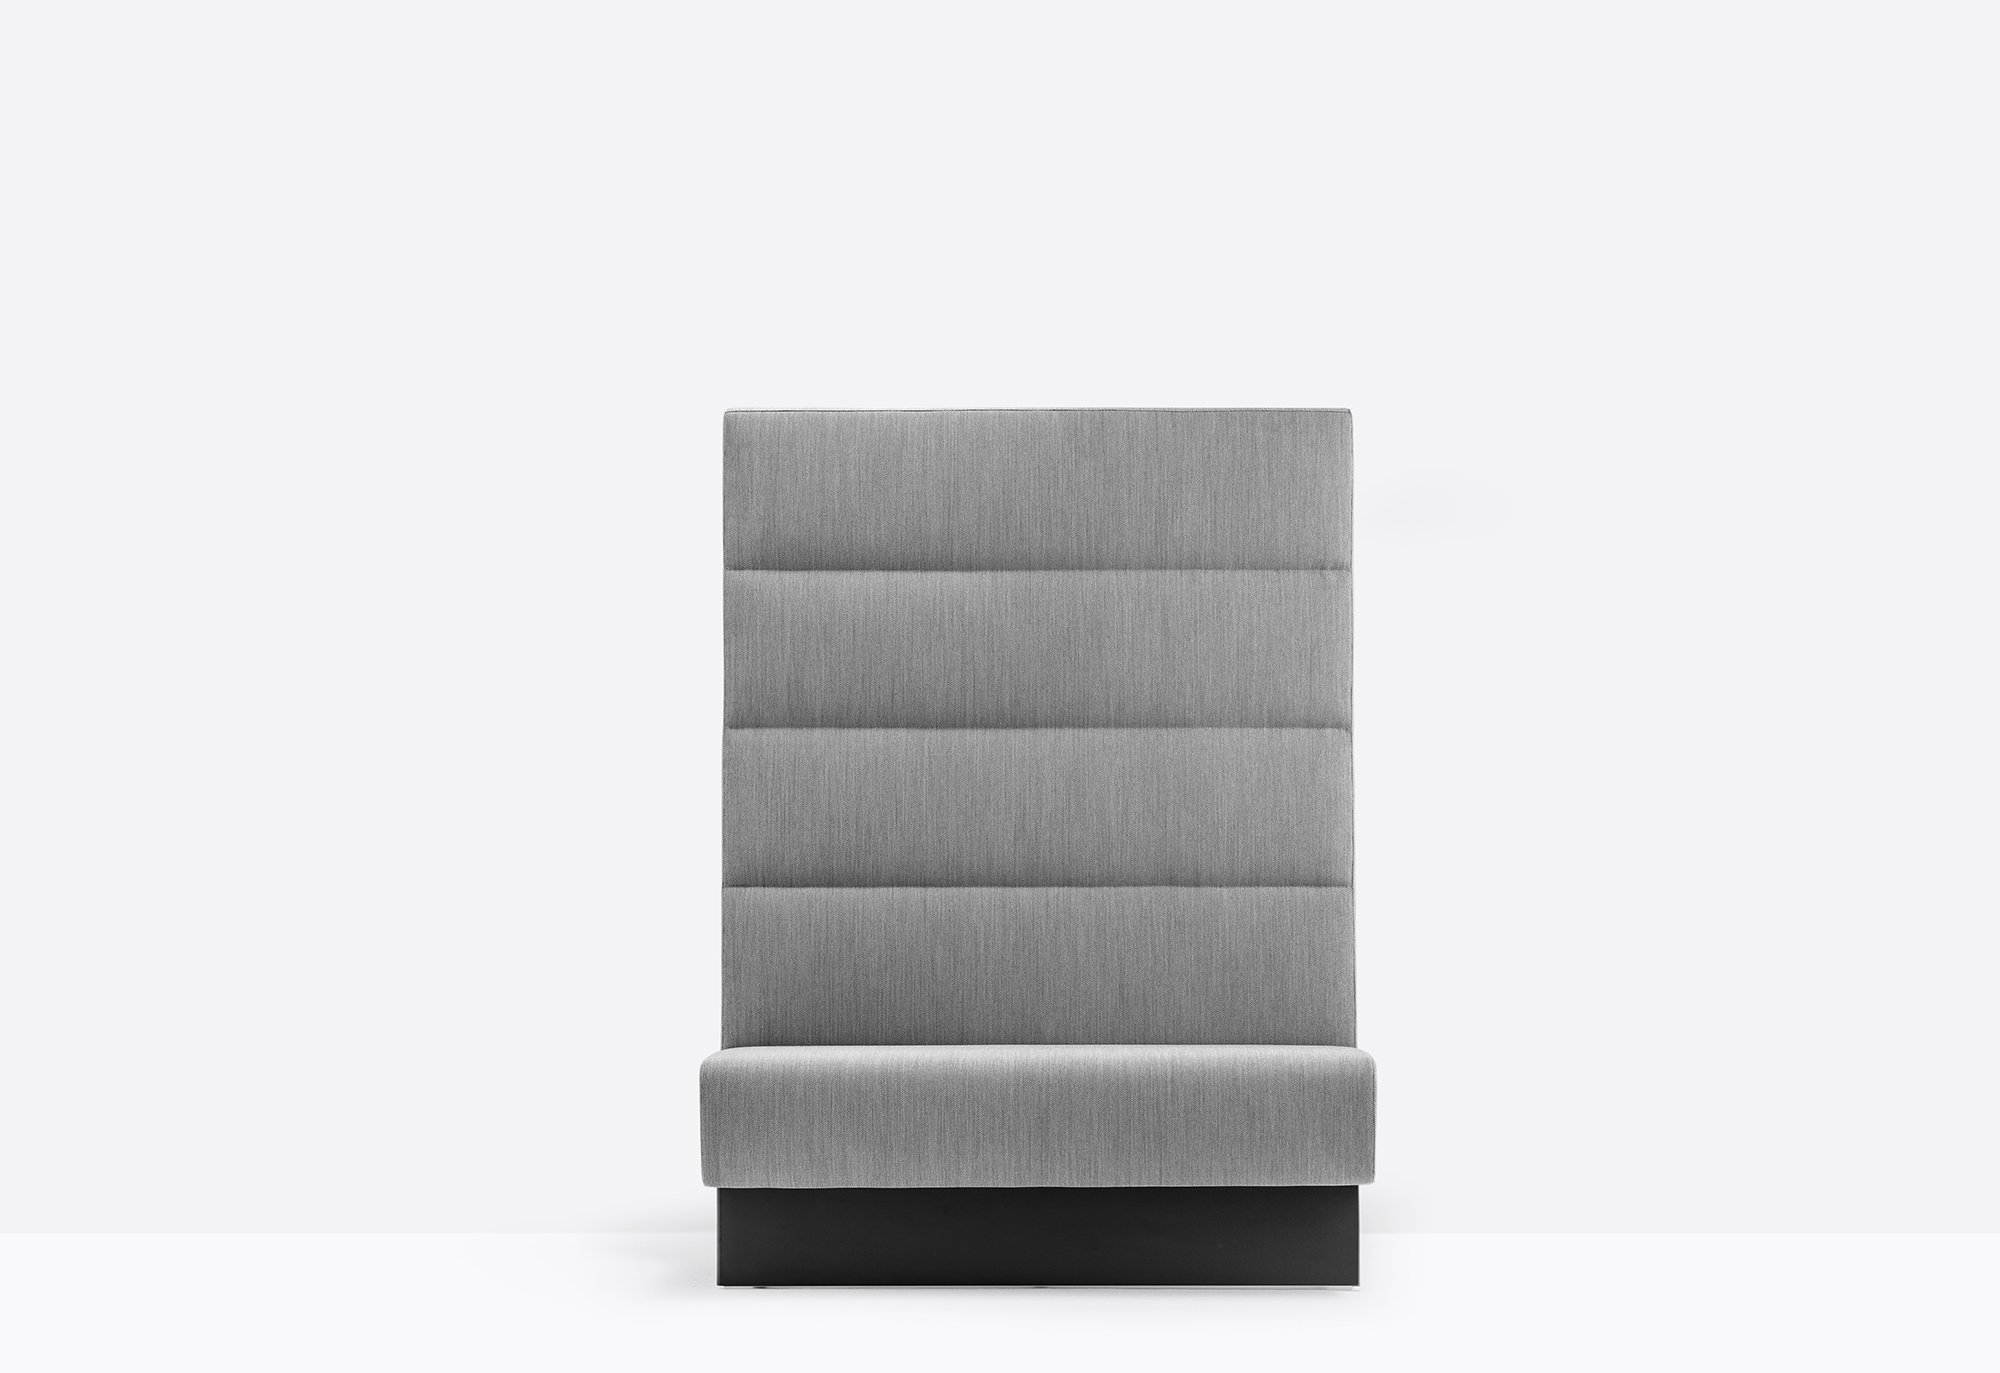 Modus Modular Seating sofa from Pedrali, designed by Pedrali R&D